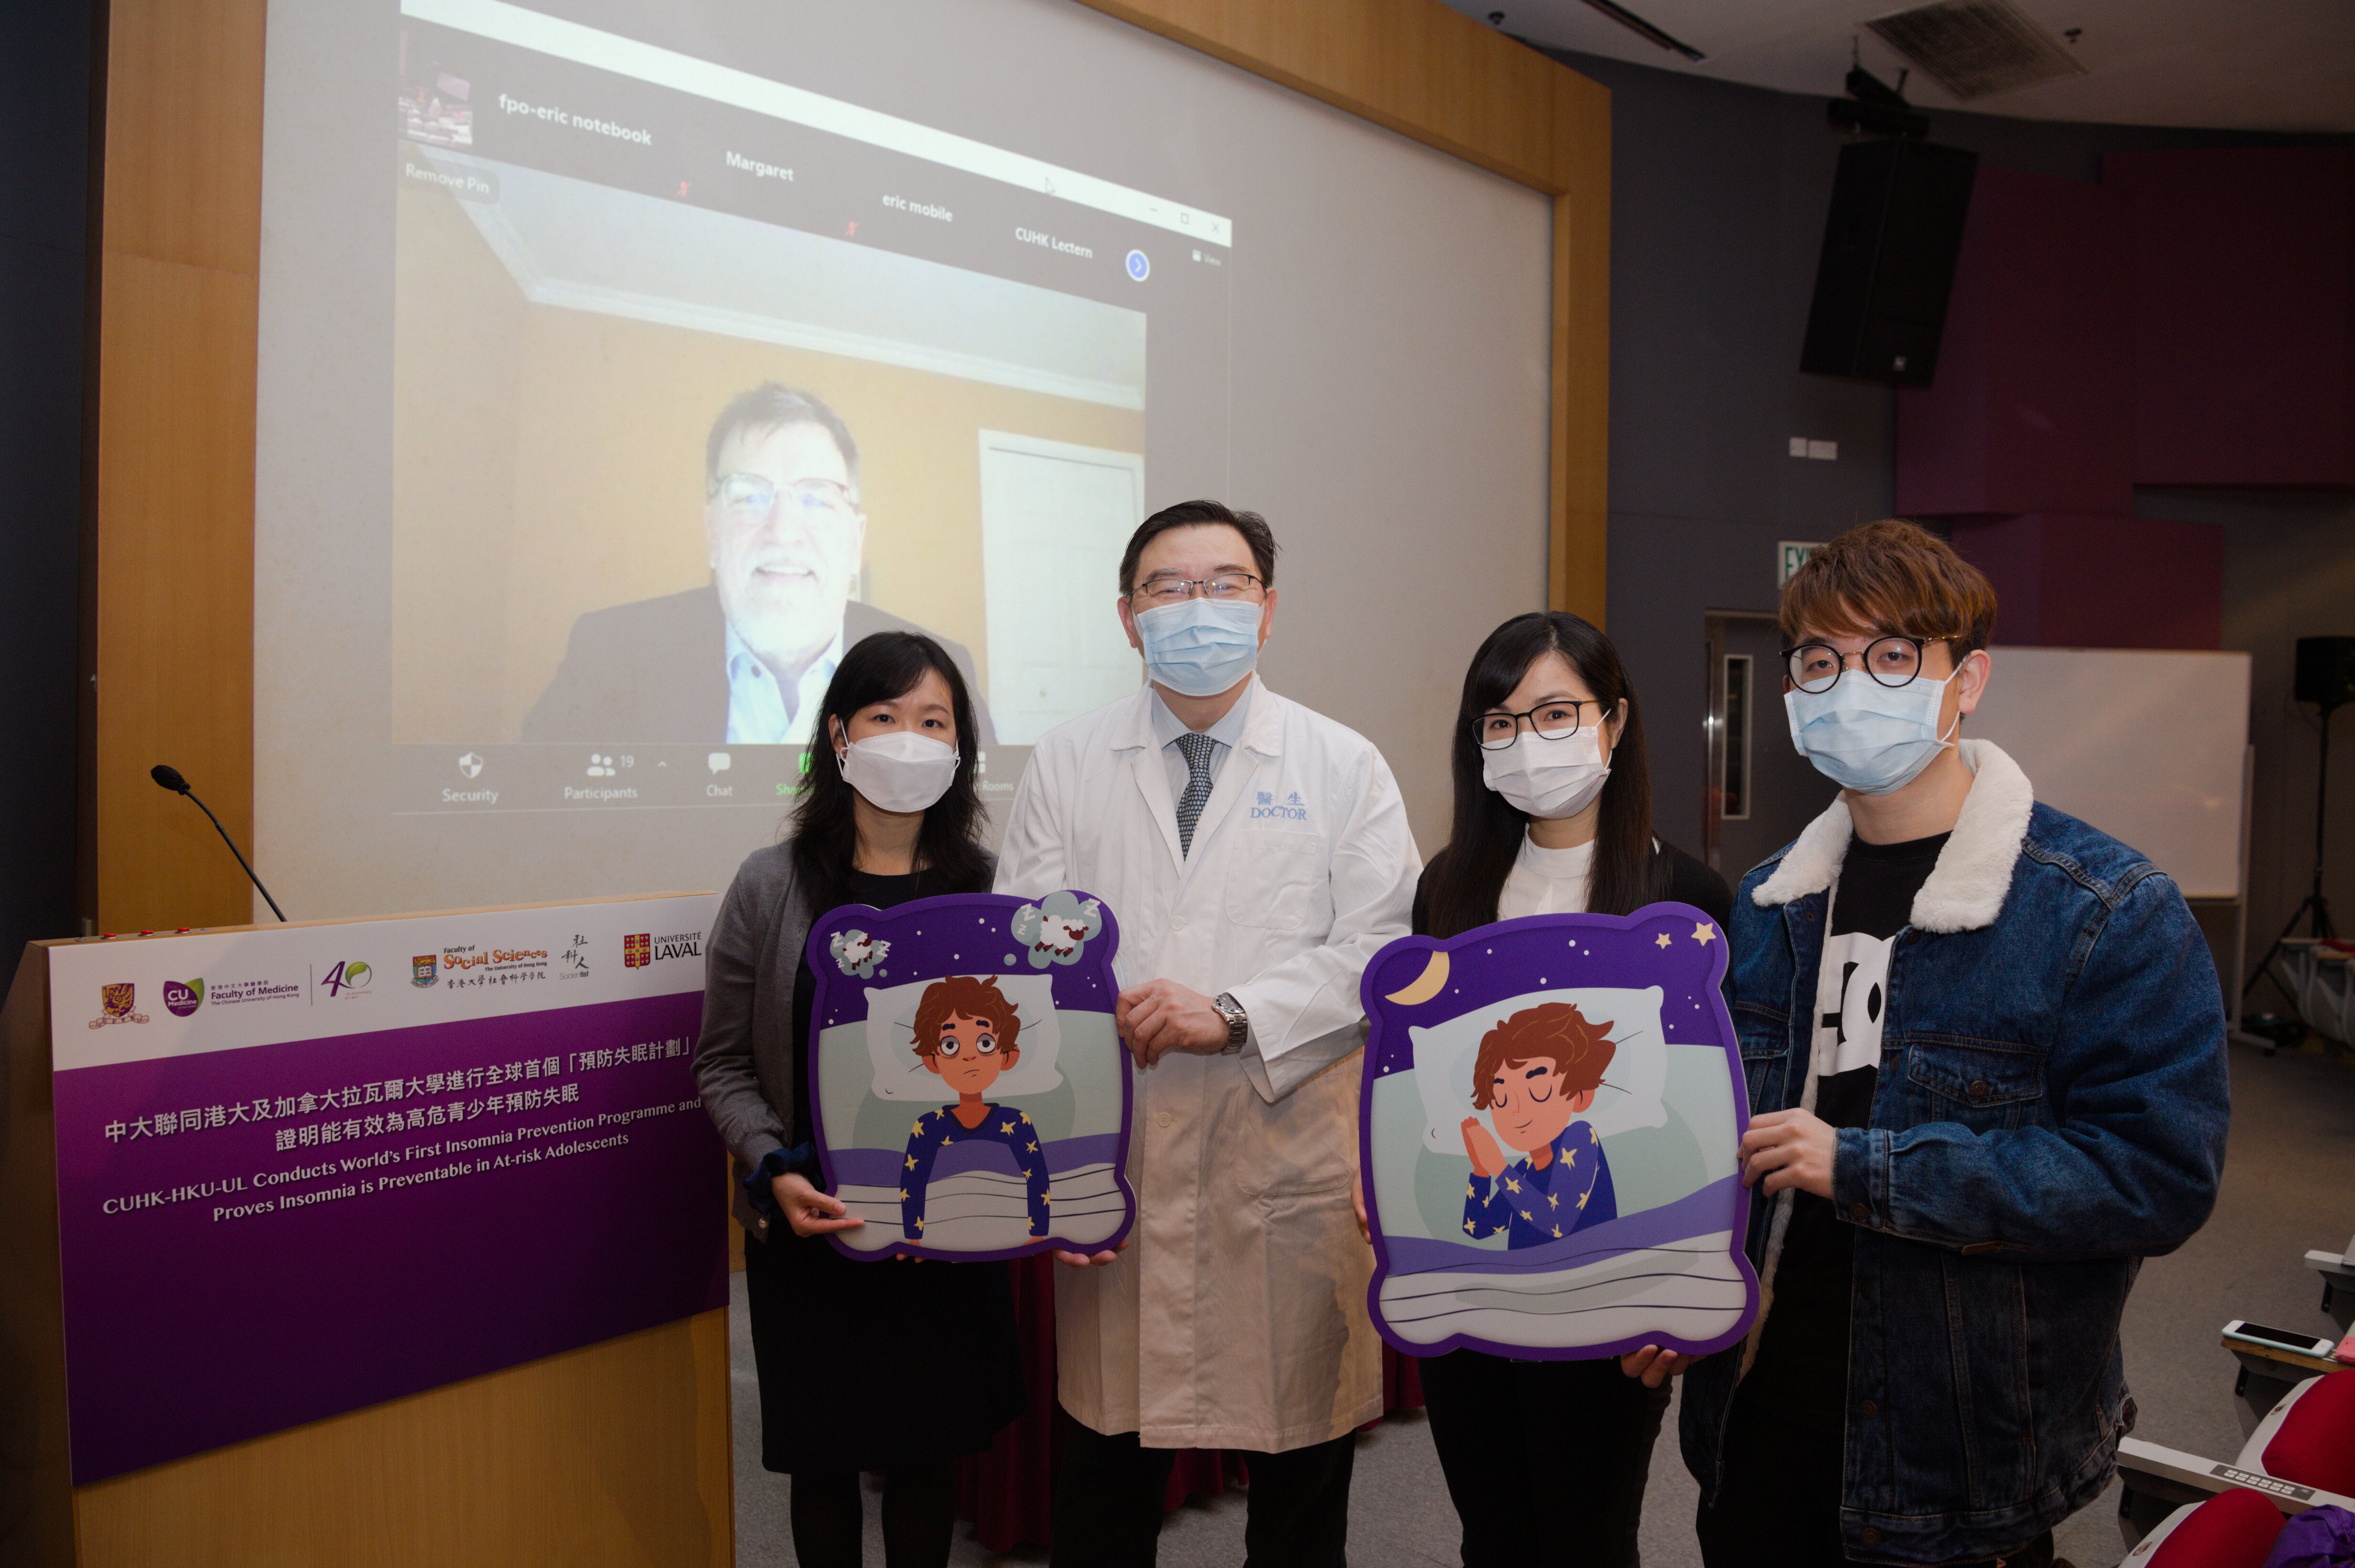 CUHK, HKU and Université Laval joined hands to conduct the world’s first randomised controlled trial of brief insomnia prevention programme for at-risk adolescents who have a positive family history of insomnia and sub-threshold insomnia symptoms.